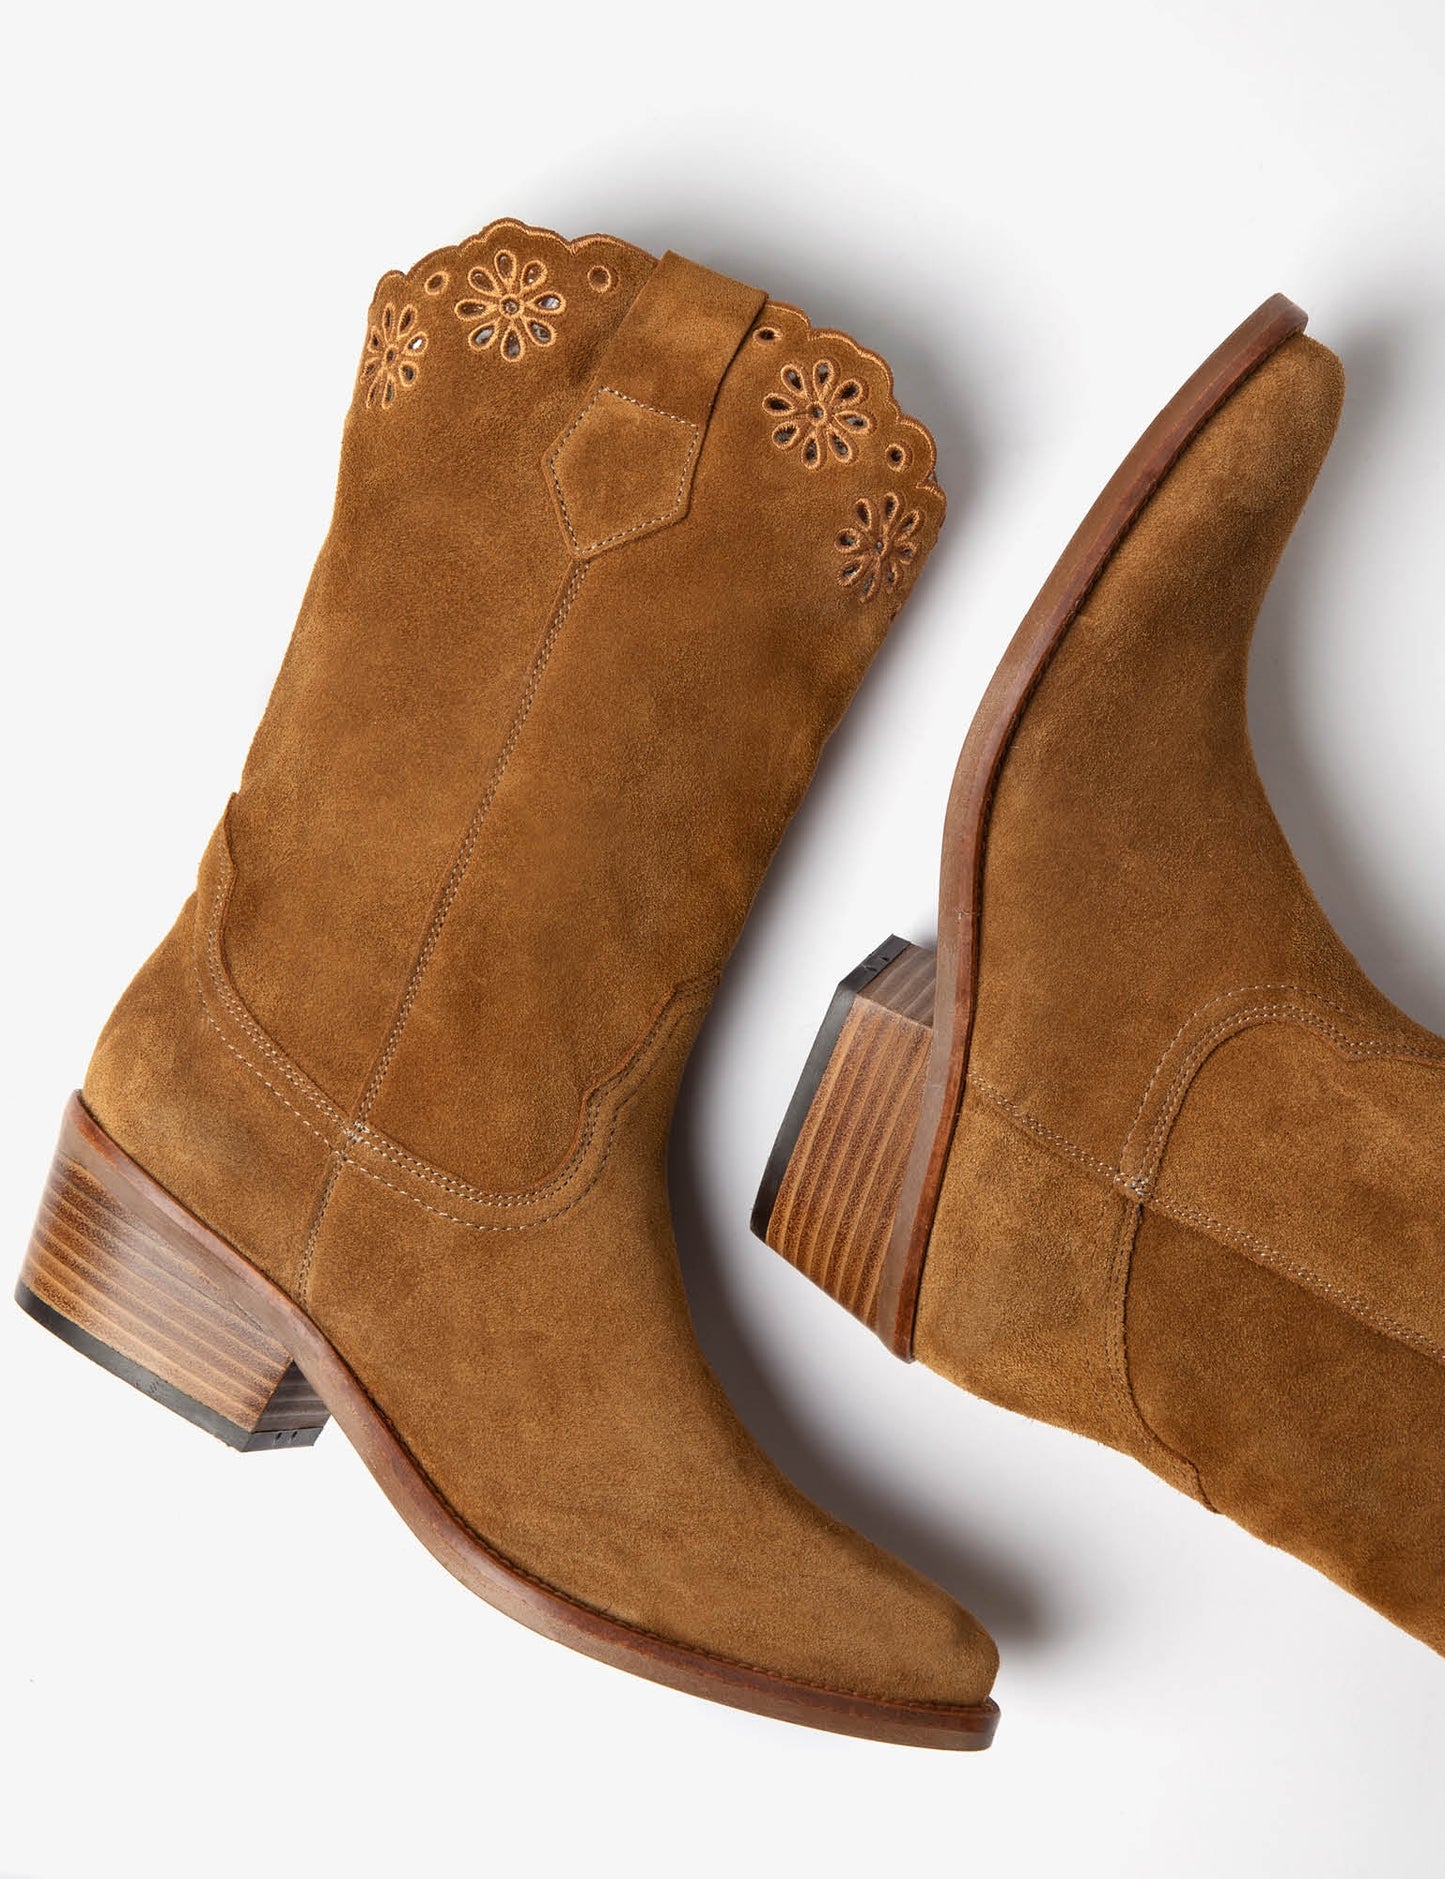 Jesse Broderie Cowboy Boot Tan Suede